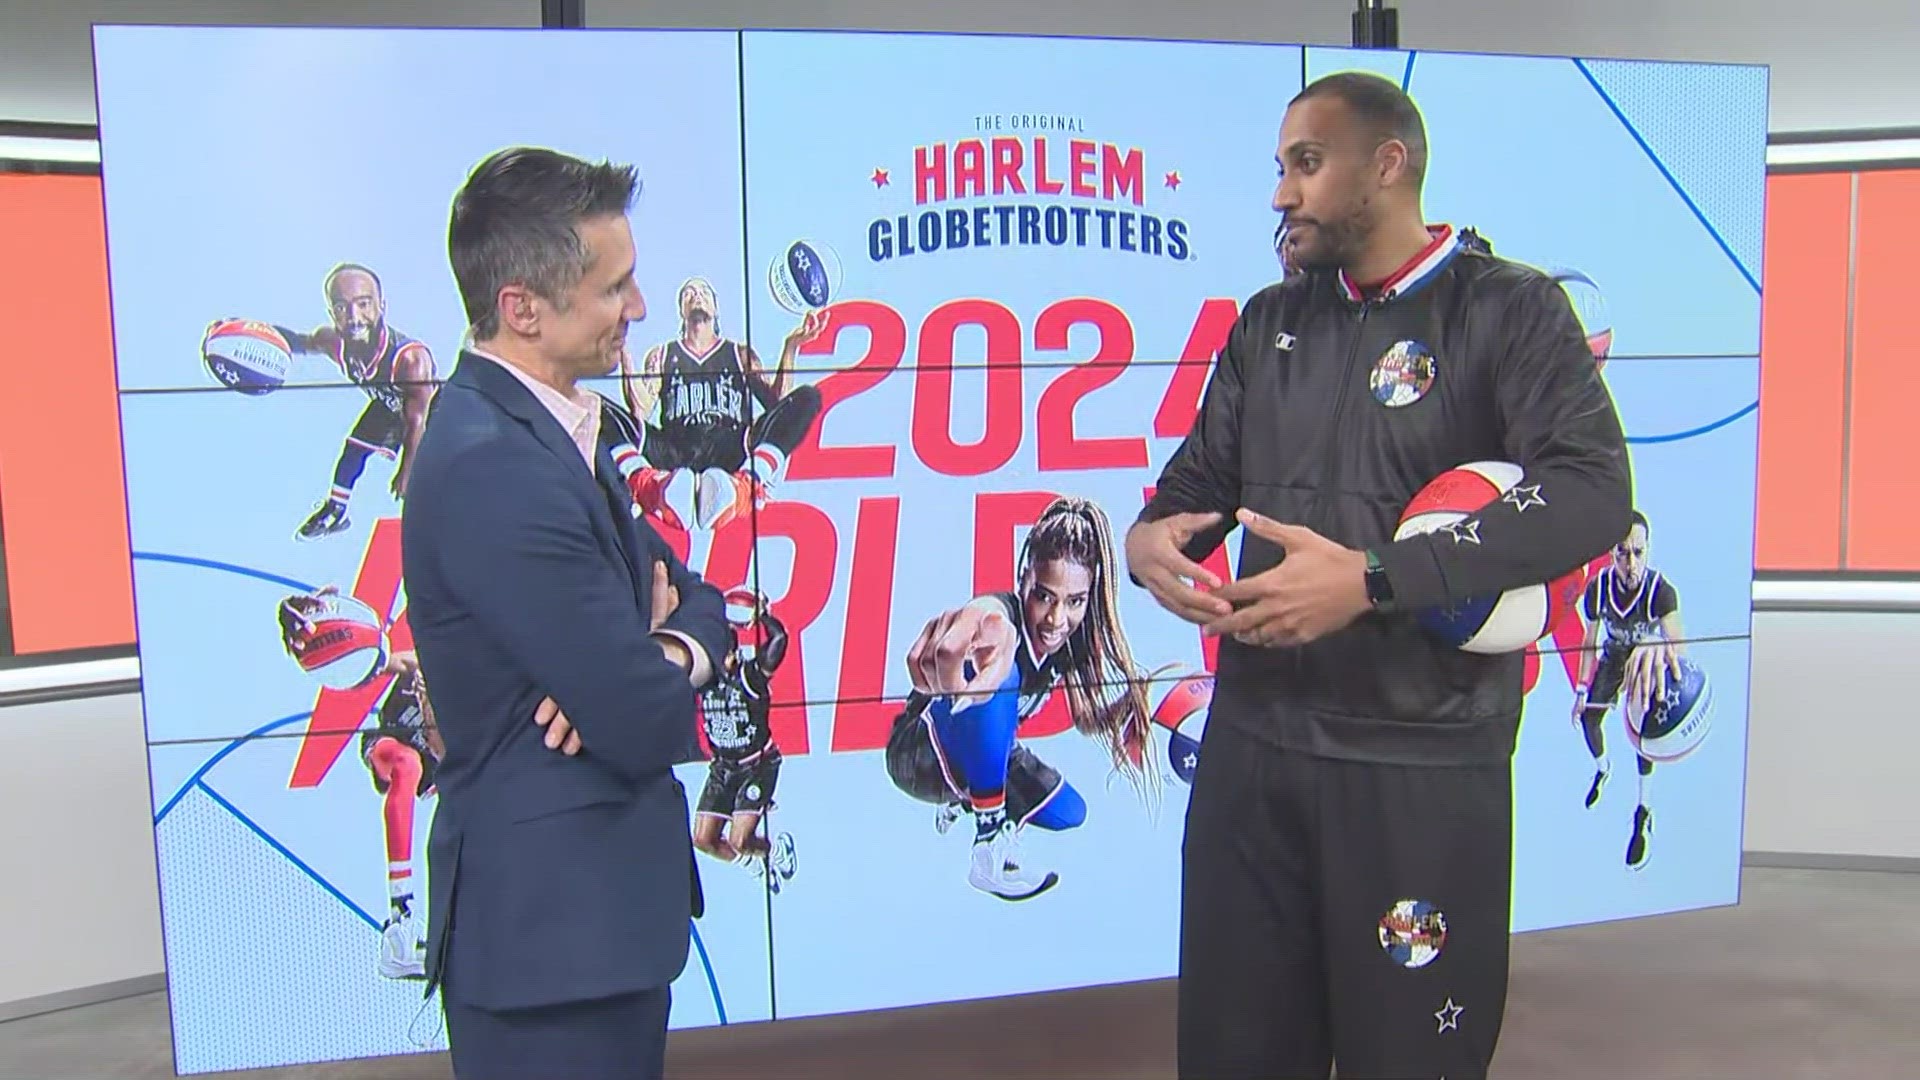 The Harlem Globetrotters are coming to town! In February, they will take on their rivals, the Washington Generals, here in Austin.